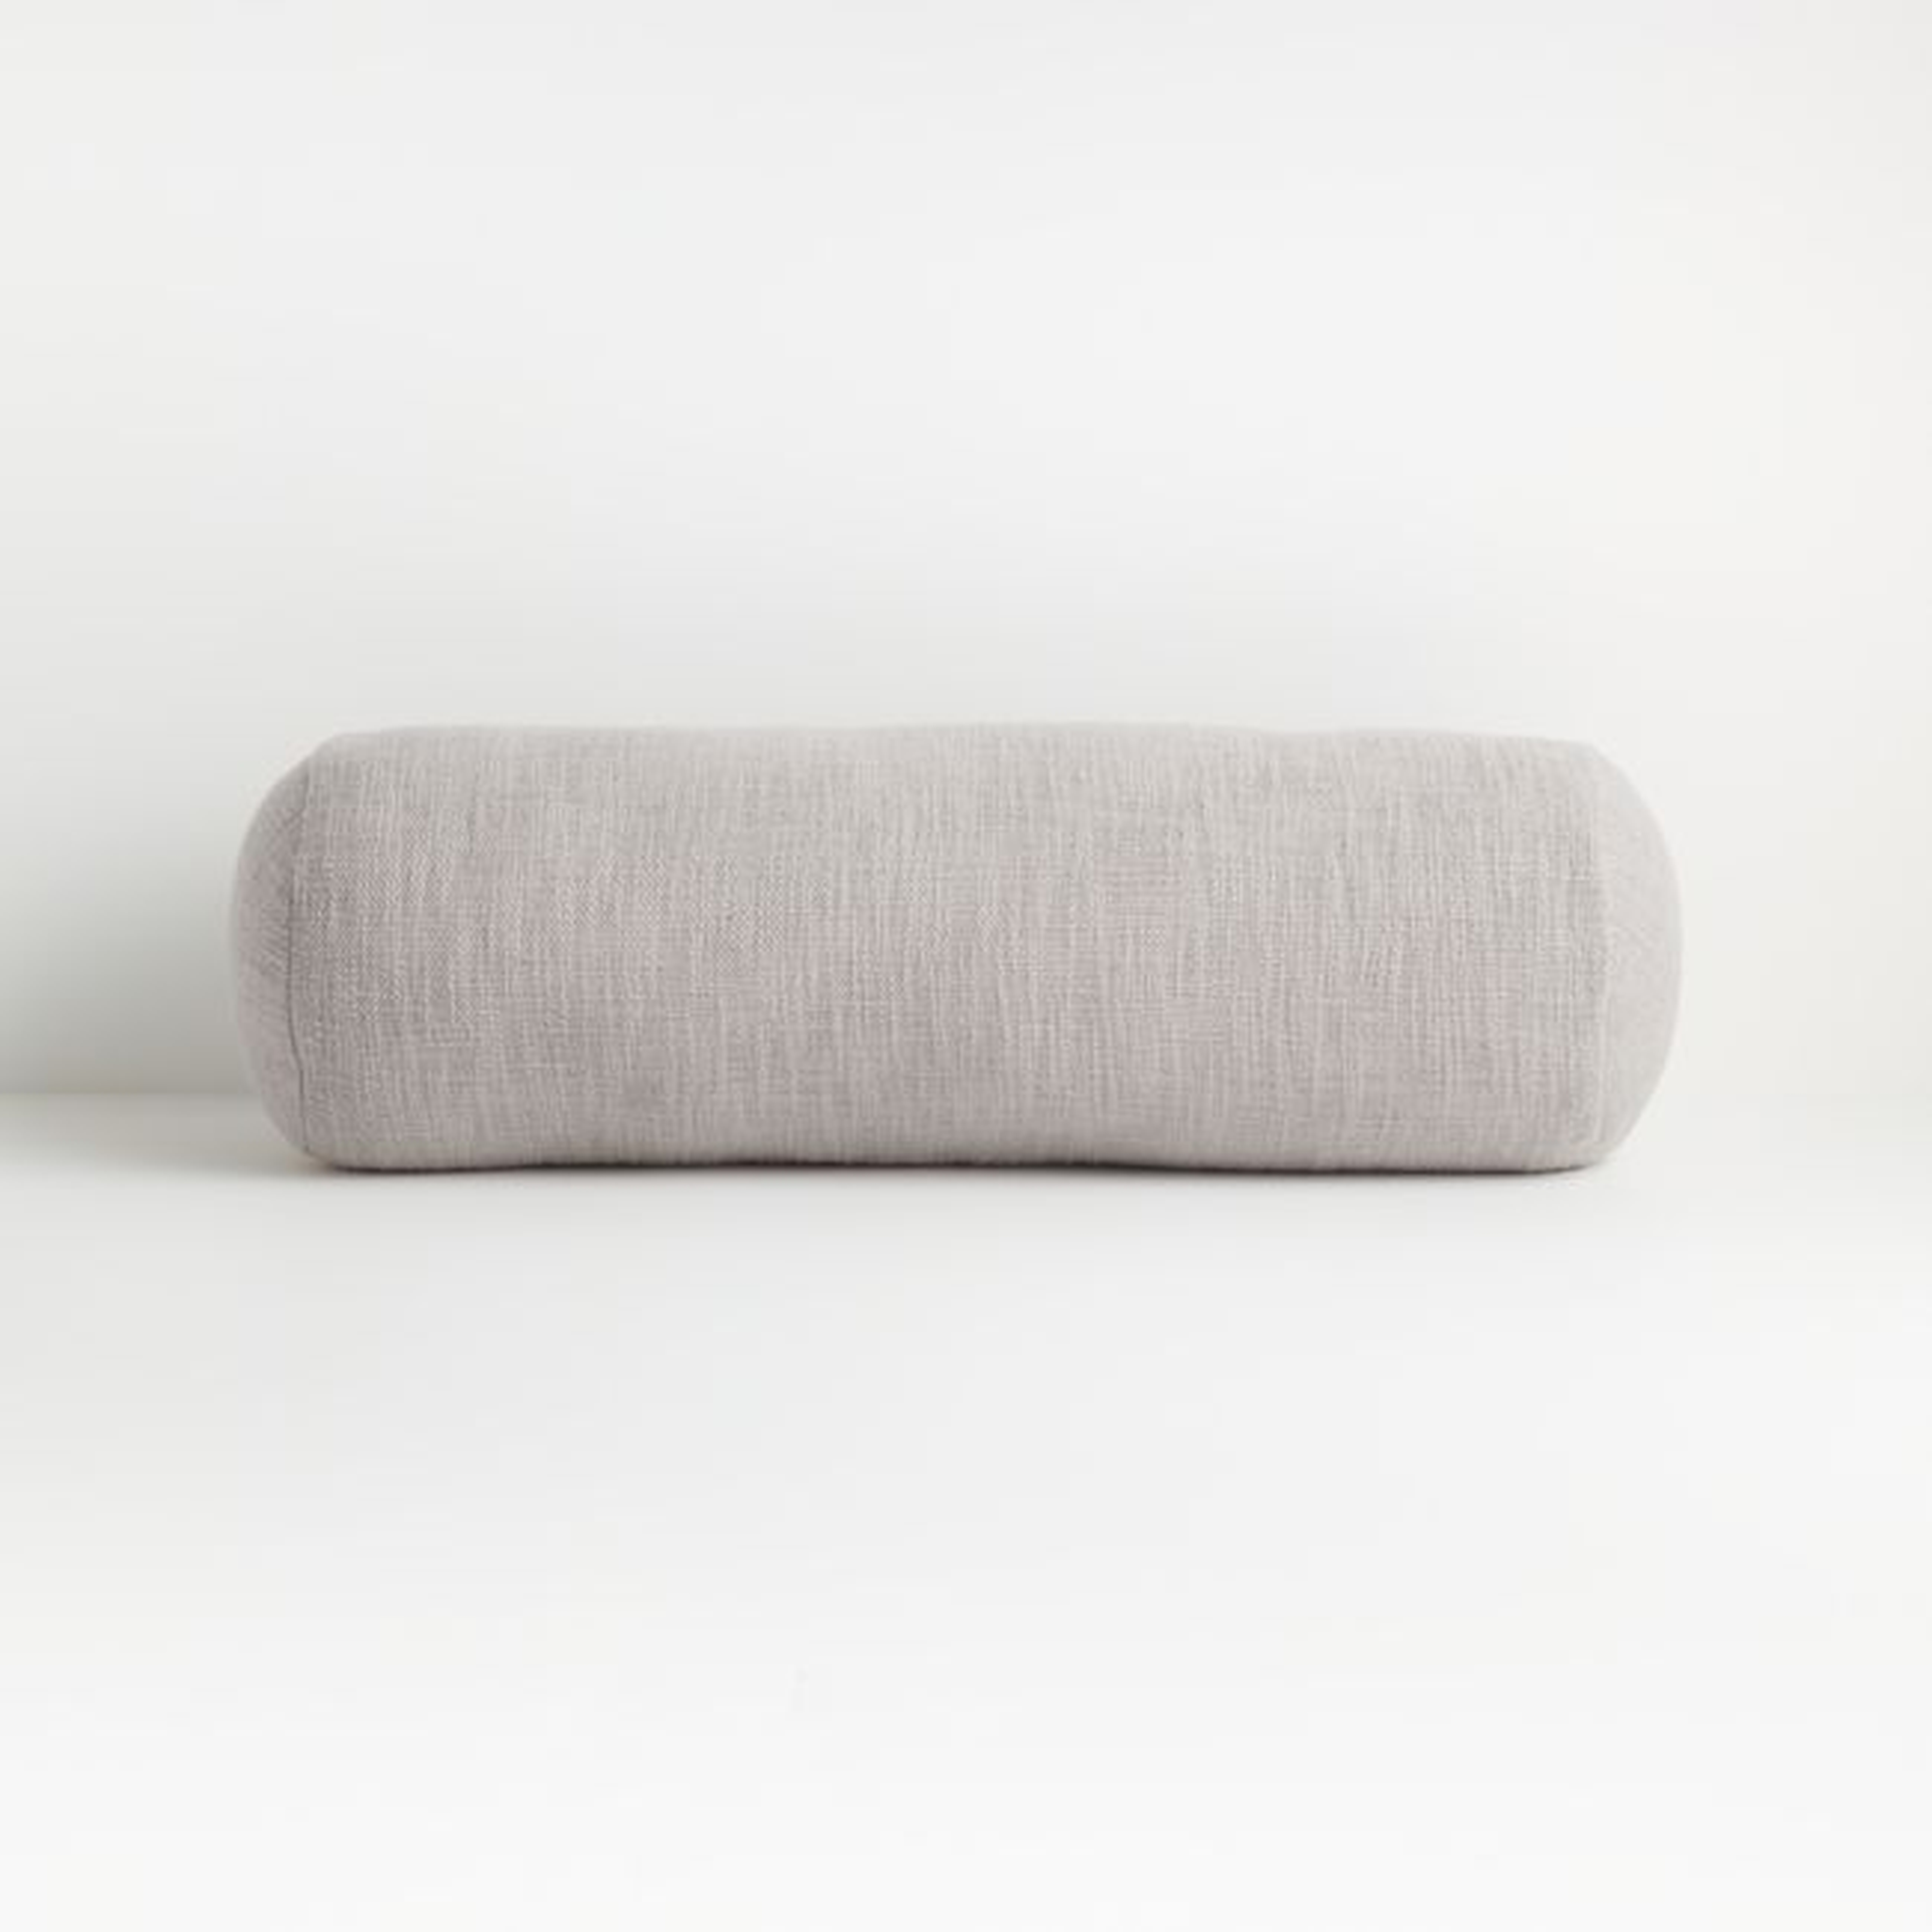 Lindstrom Grey 24?x8" Bolster Pillow - Crate and Barrel